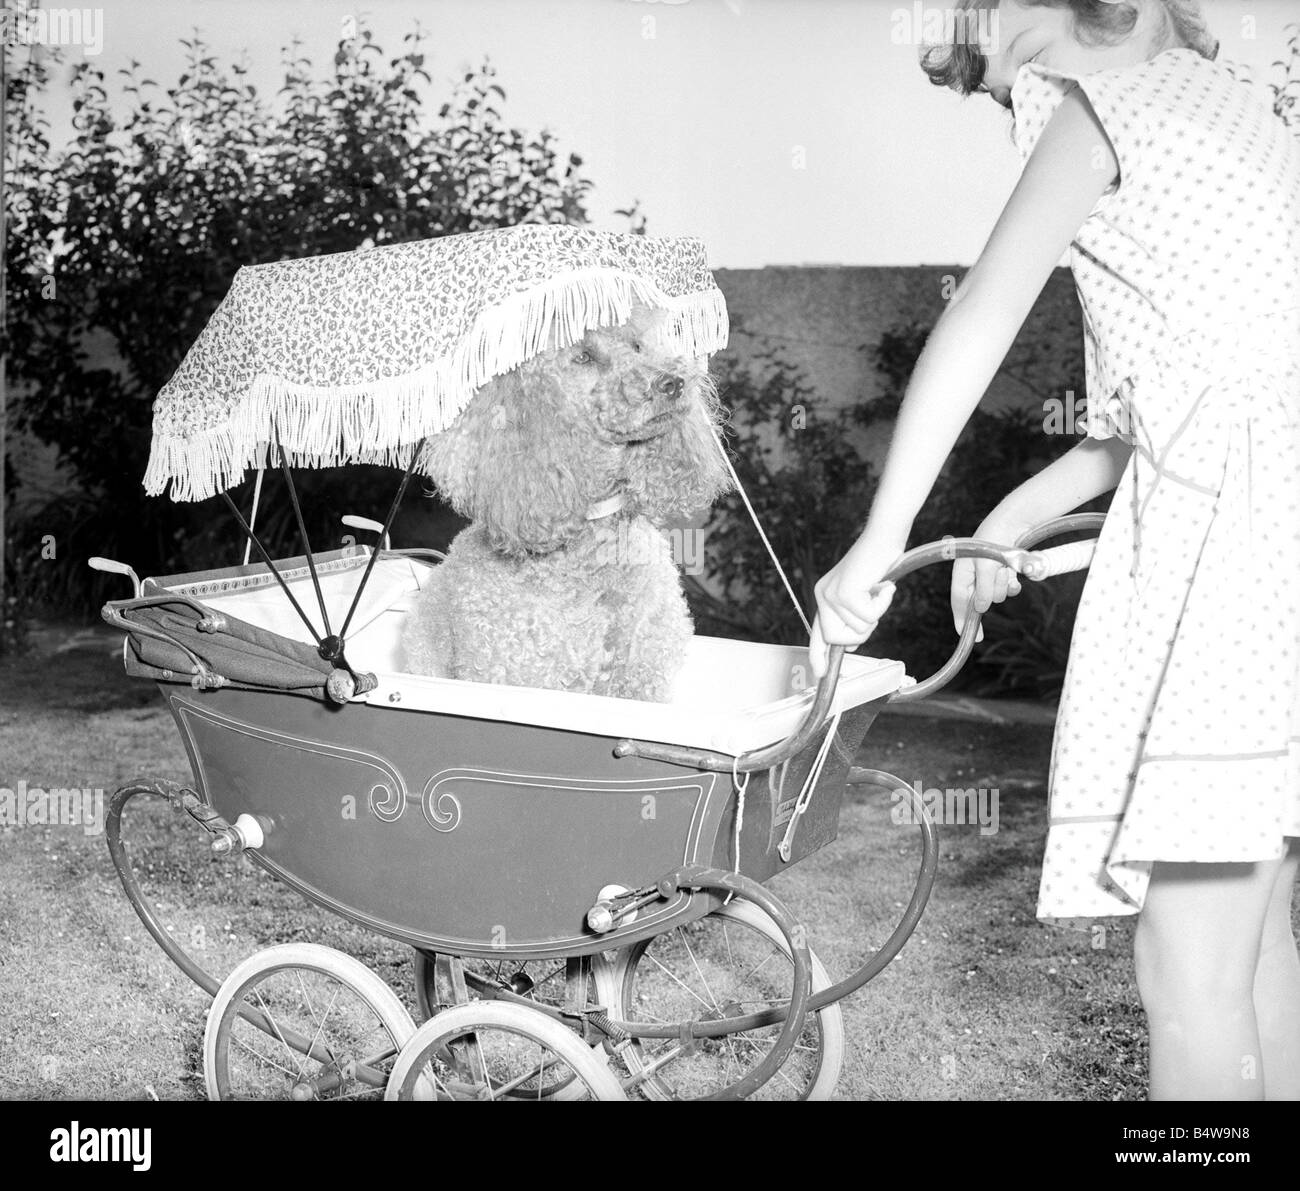 Poodle in pram July 1955 Mischa the French Poodle is pished around in a doll s pram by a little girl whilst on holiday in Plymouth Devon Bored tired sleepy dog yawning sulking under parasol in the summer with her teeth showing 1950s animal dog humour Child having fun mirrorpix Stock Photo